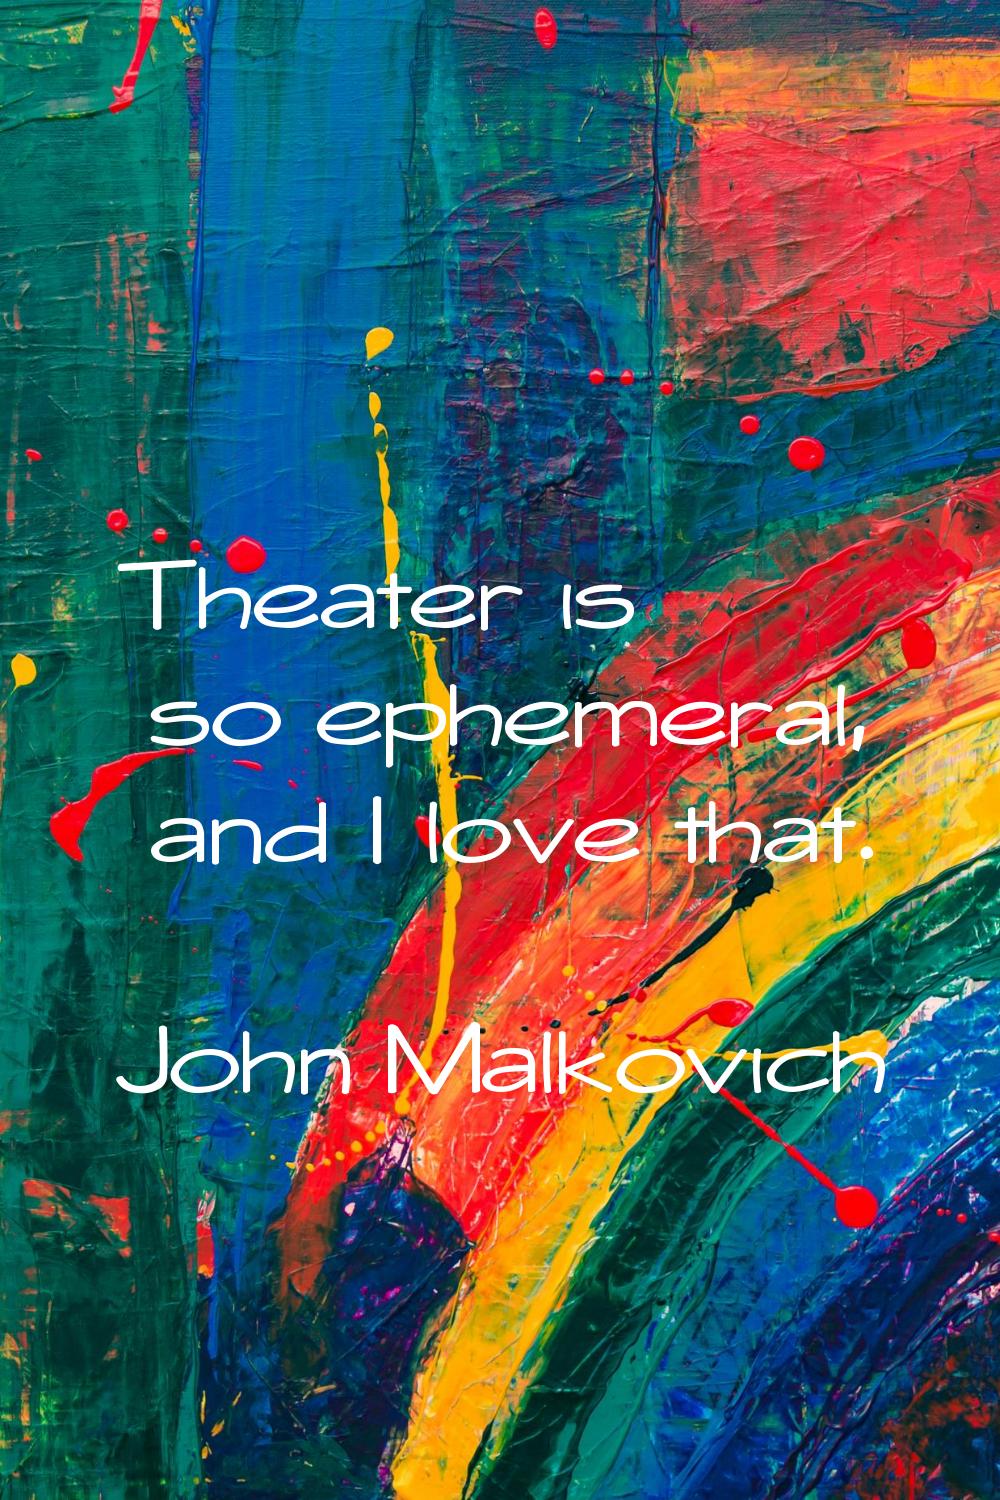 Theater is so ephemeral, and I love that.